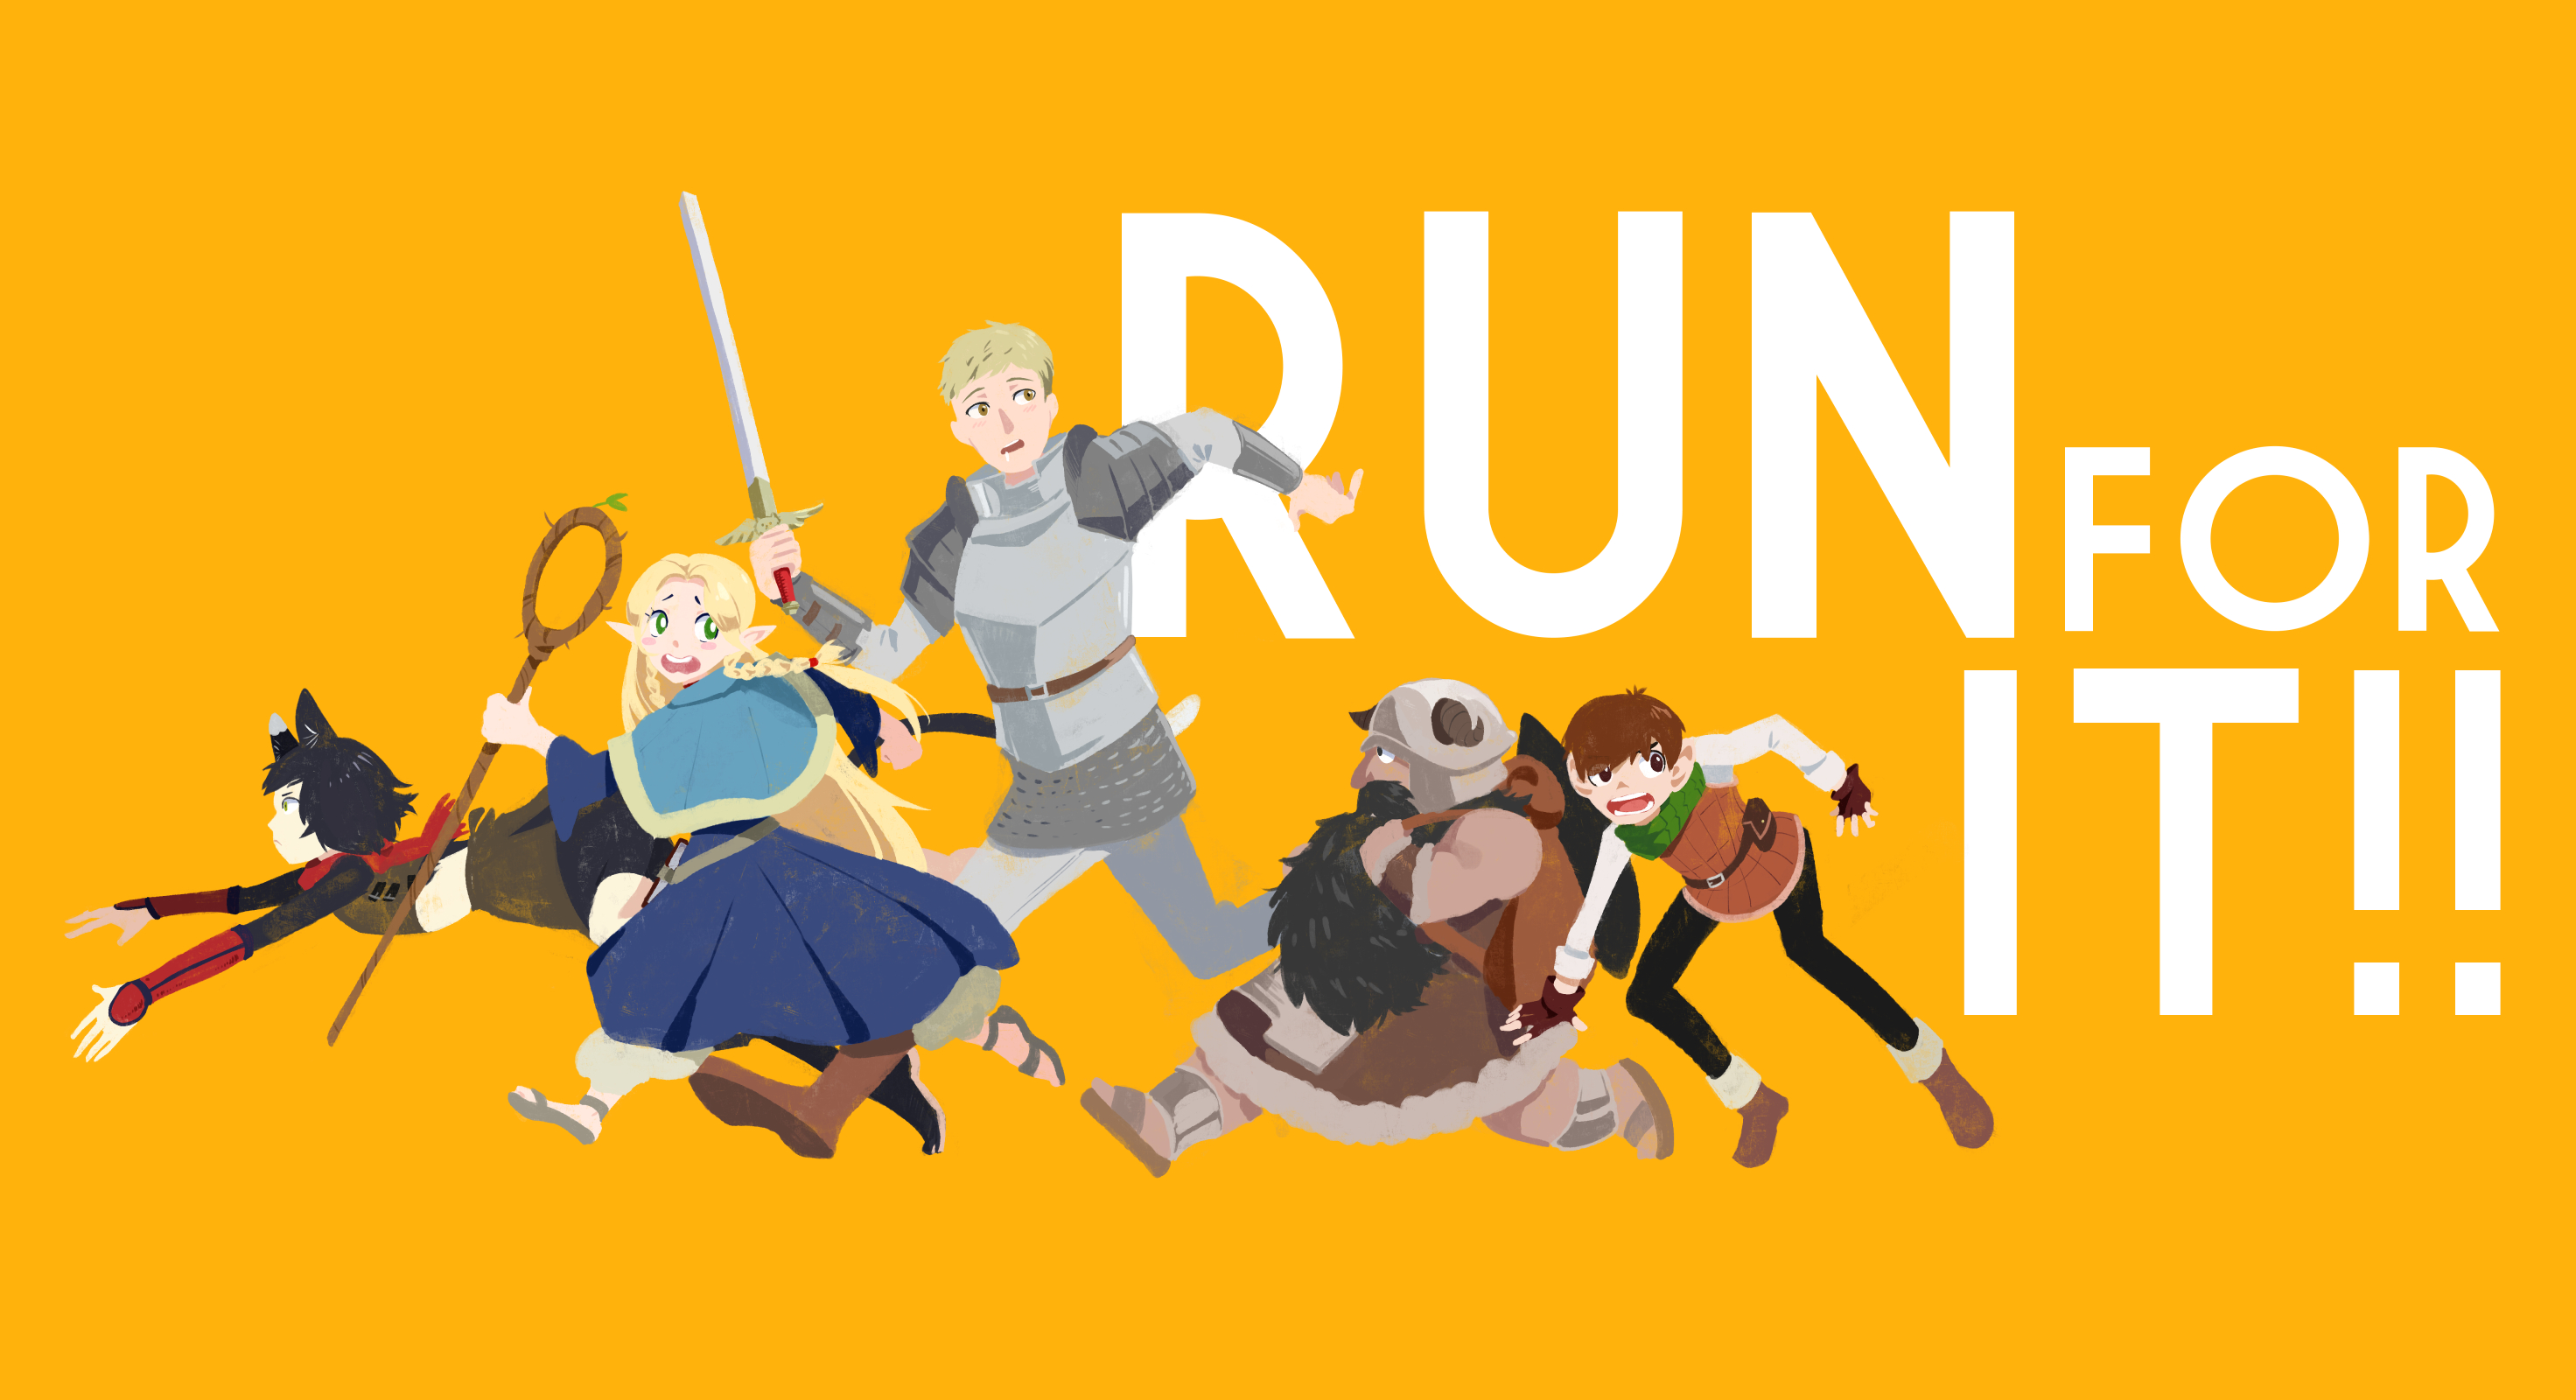 Anime 2944x1600 anime anime girls anime boys Delicious in Dungeon Marcille Donato Laios Thorden Senshi (Delicious in Dungeon) Chilchuck Tims Izutsumi (Delicious in Dungeon) blonde long hair short hair animal ears elves pointy ears running armor dwarf simple background